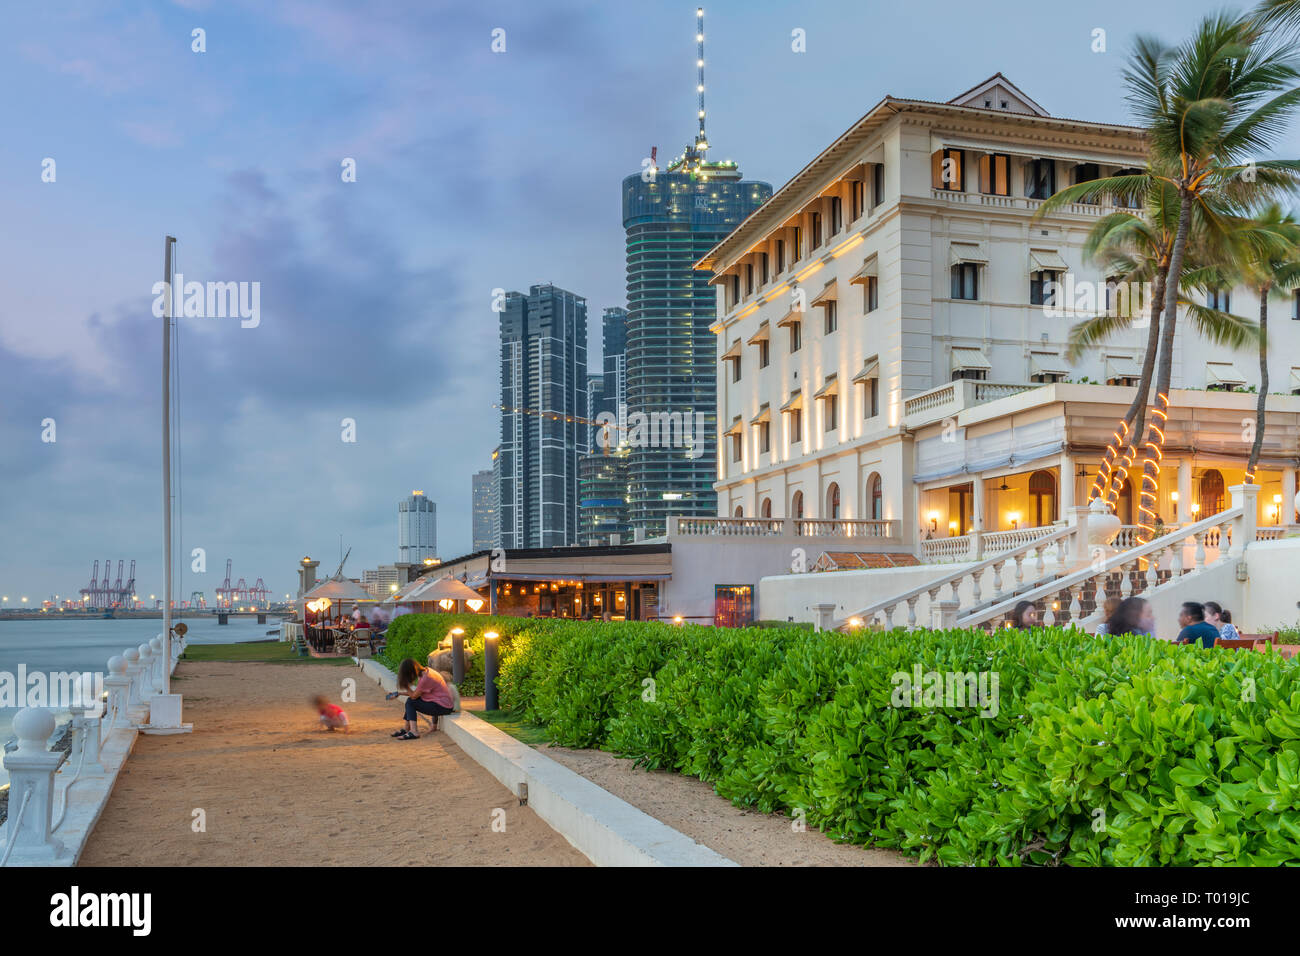 One of Sri Lanka’s iconic landmarks, The Galle Face Hotel, is situated in the heart of Colombo, along the seafront and facing the famous Galle Face Gr Stock Photo